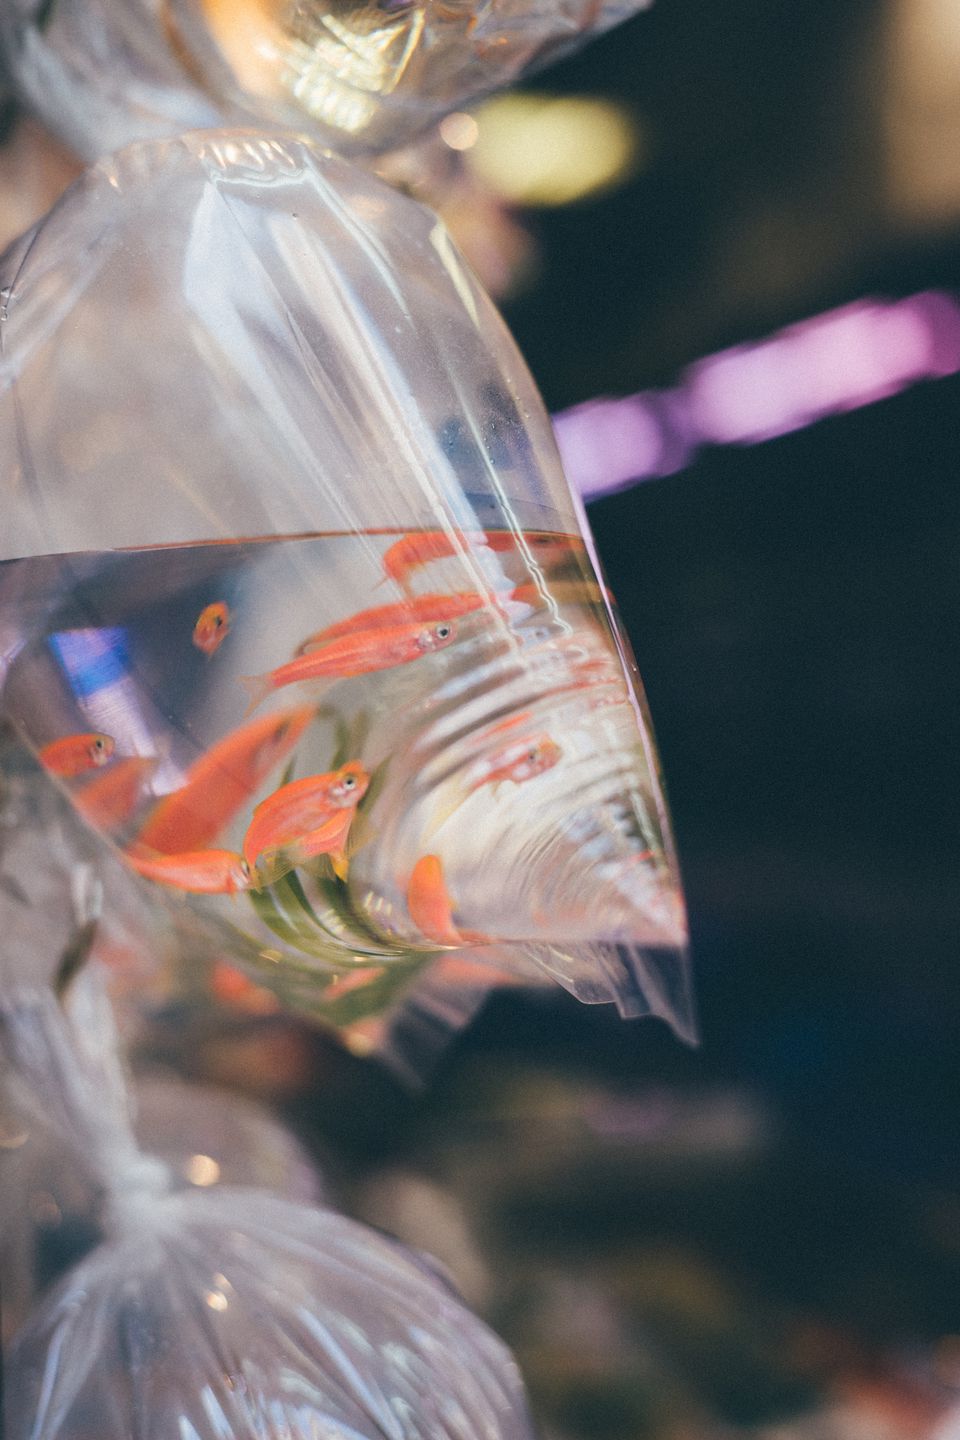 New fish in a plastic bag of water